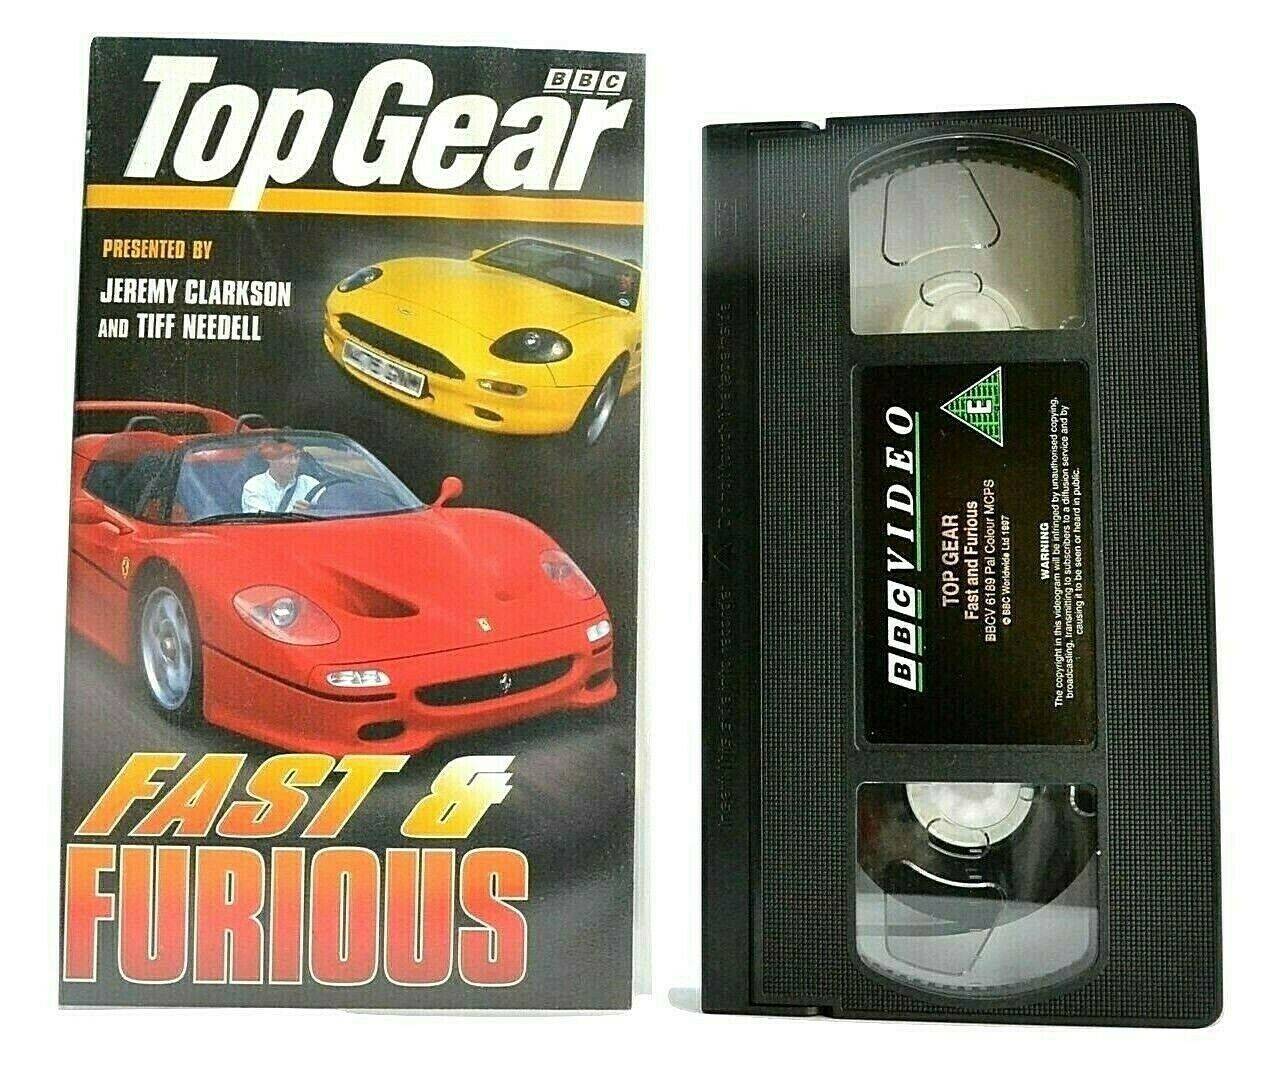 Top Gear: Fast & Furious [BBC] - Cars - Jeremy Clarkson/Tiff Needell - Pal VHS-